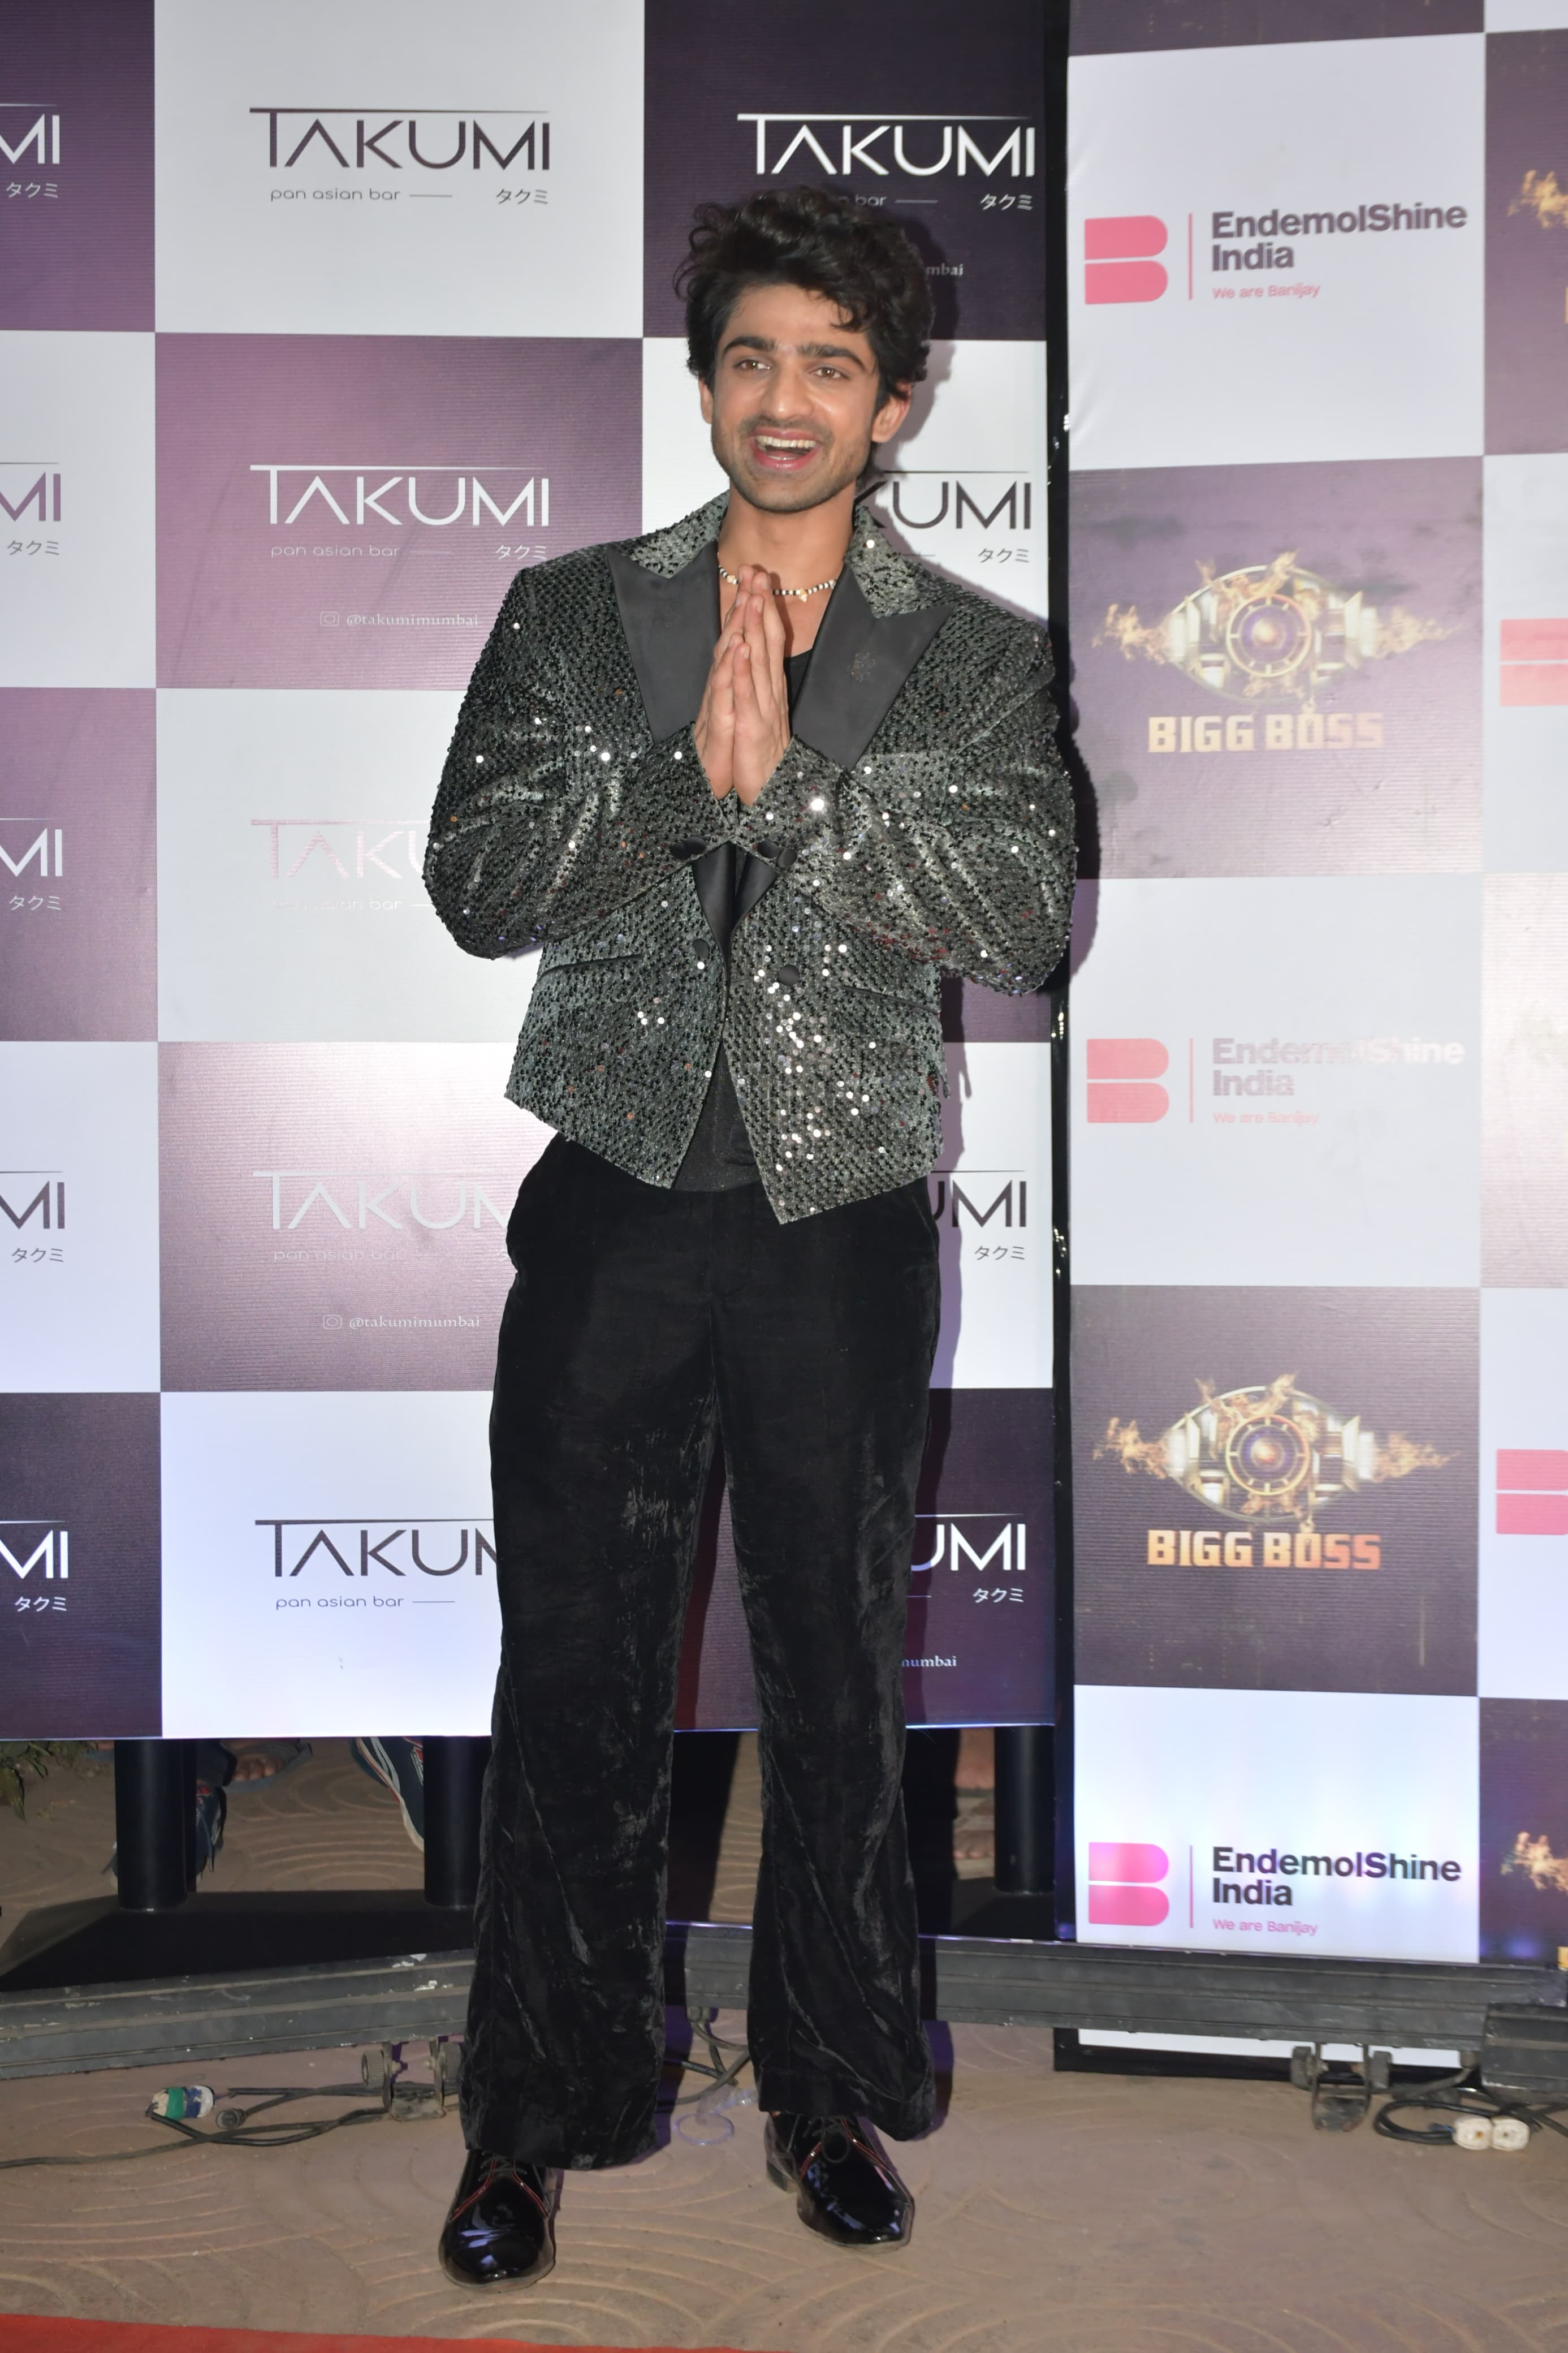 Abhishek Kumar was also among the celebrities who attended the reunion party